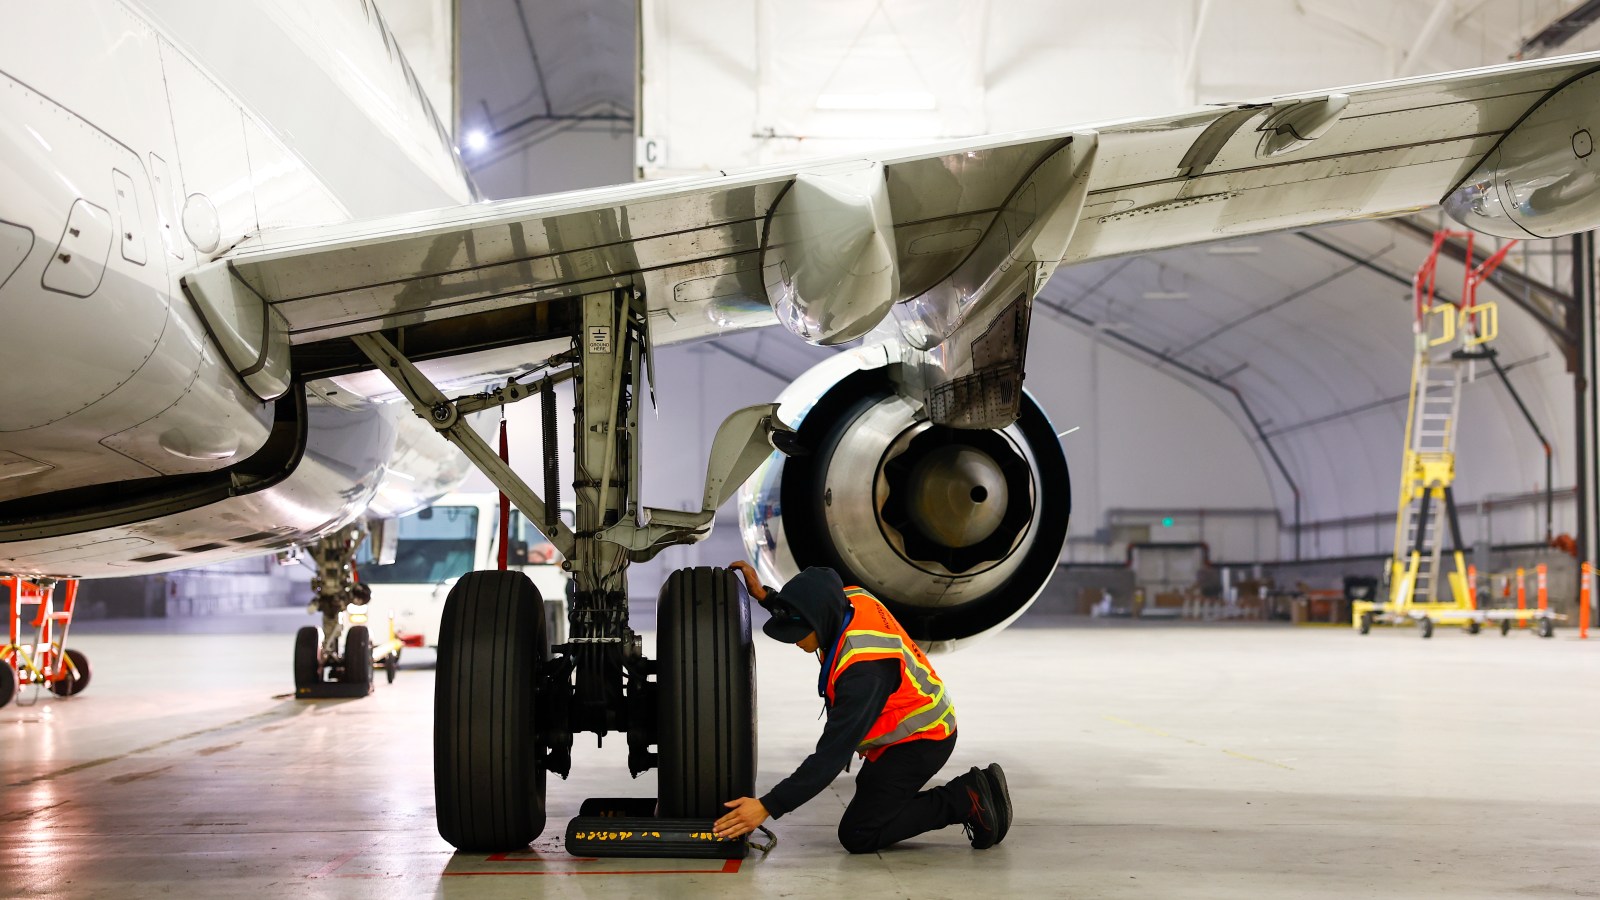 He used to load planes; now he fixes them - Alaska Airlines News